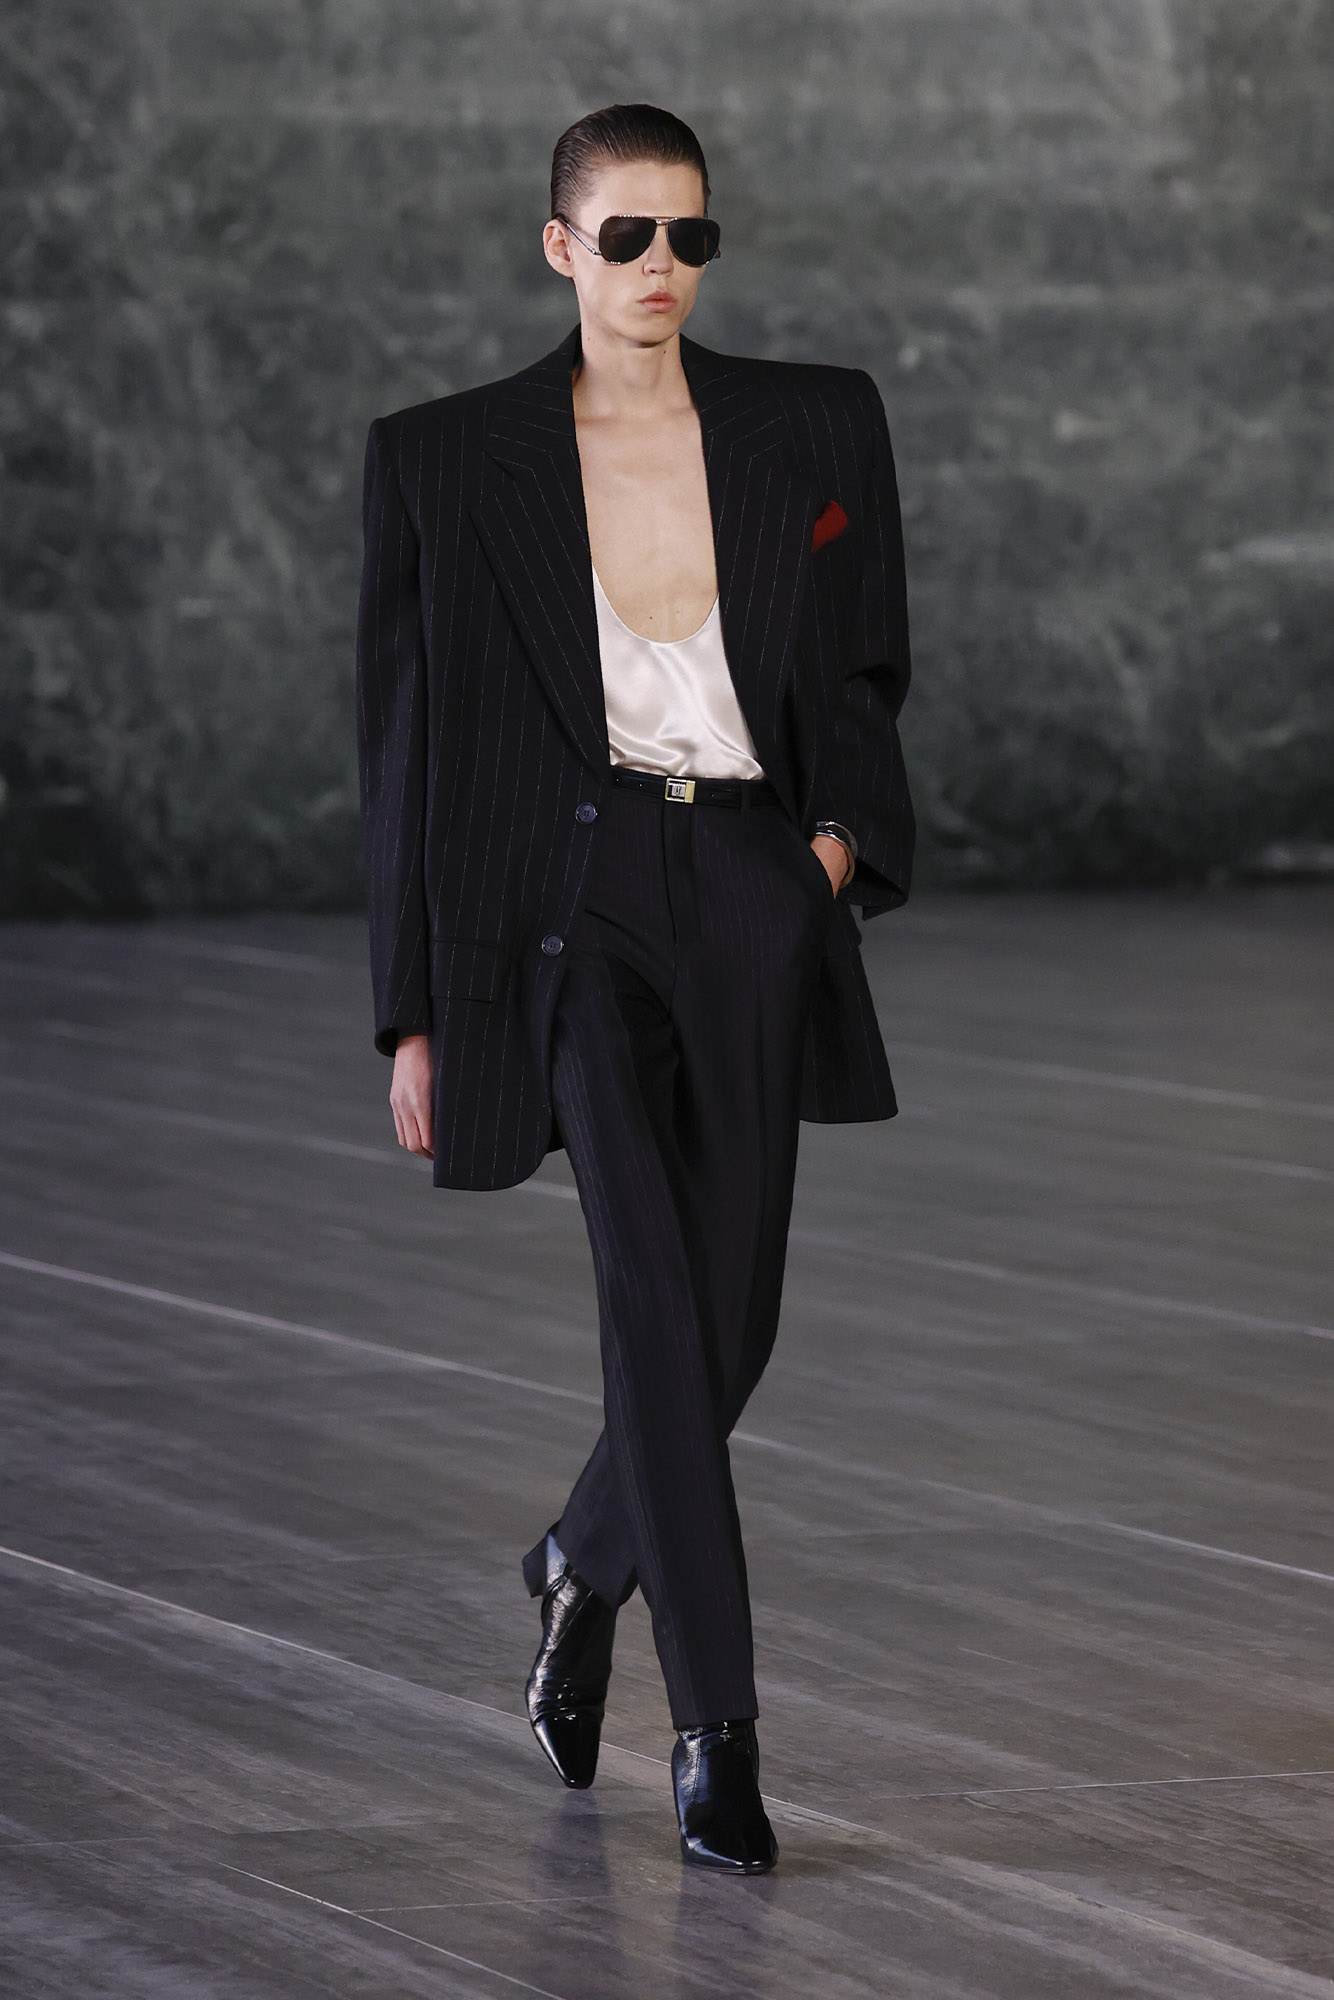 Saint Laurent Spring/Summer 2024 male model in suit with tank top on runway